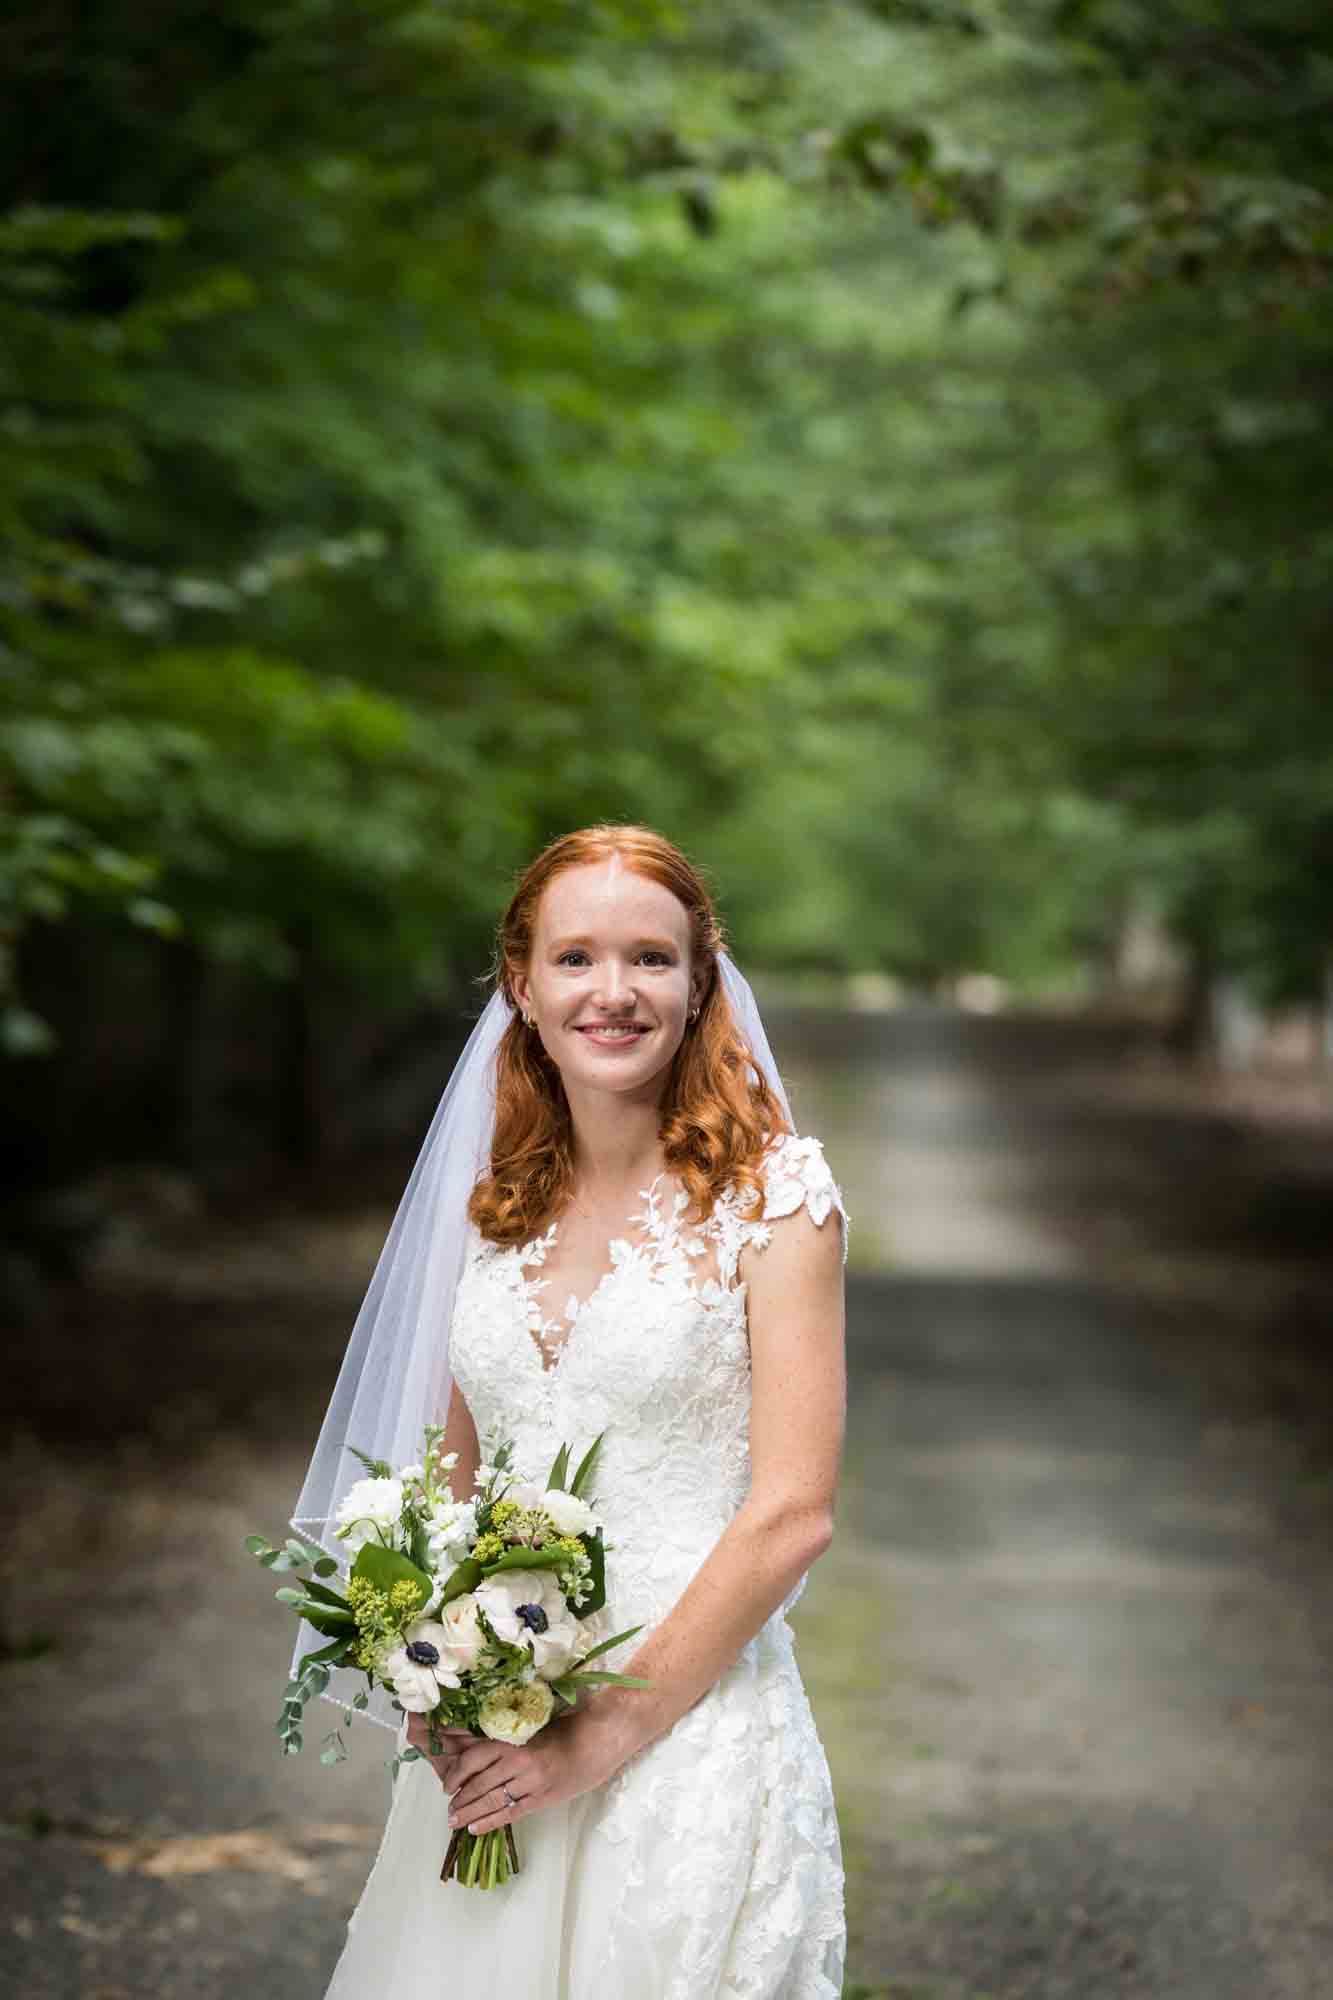 Bride wearing white dress and veil and holding bouquet in middle of dirt driveway